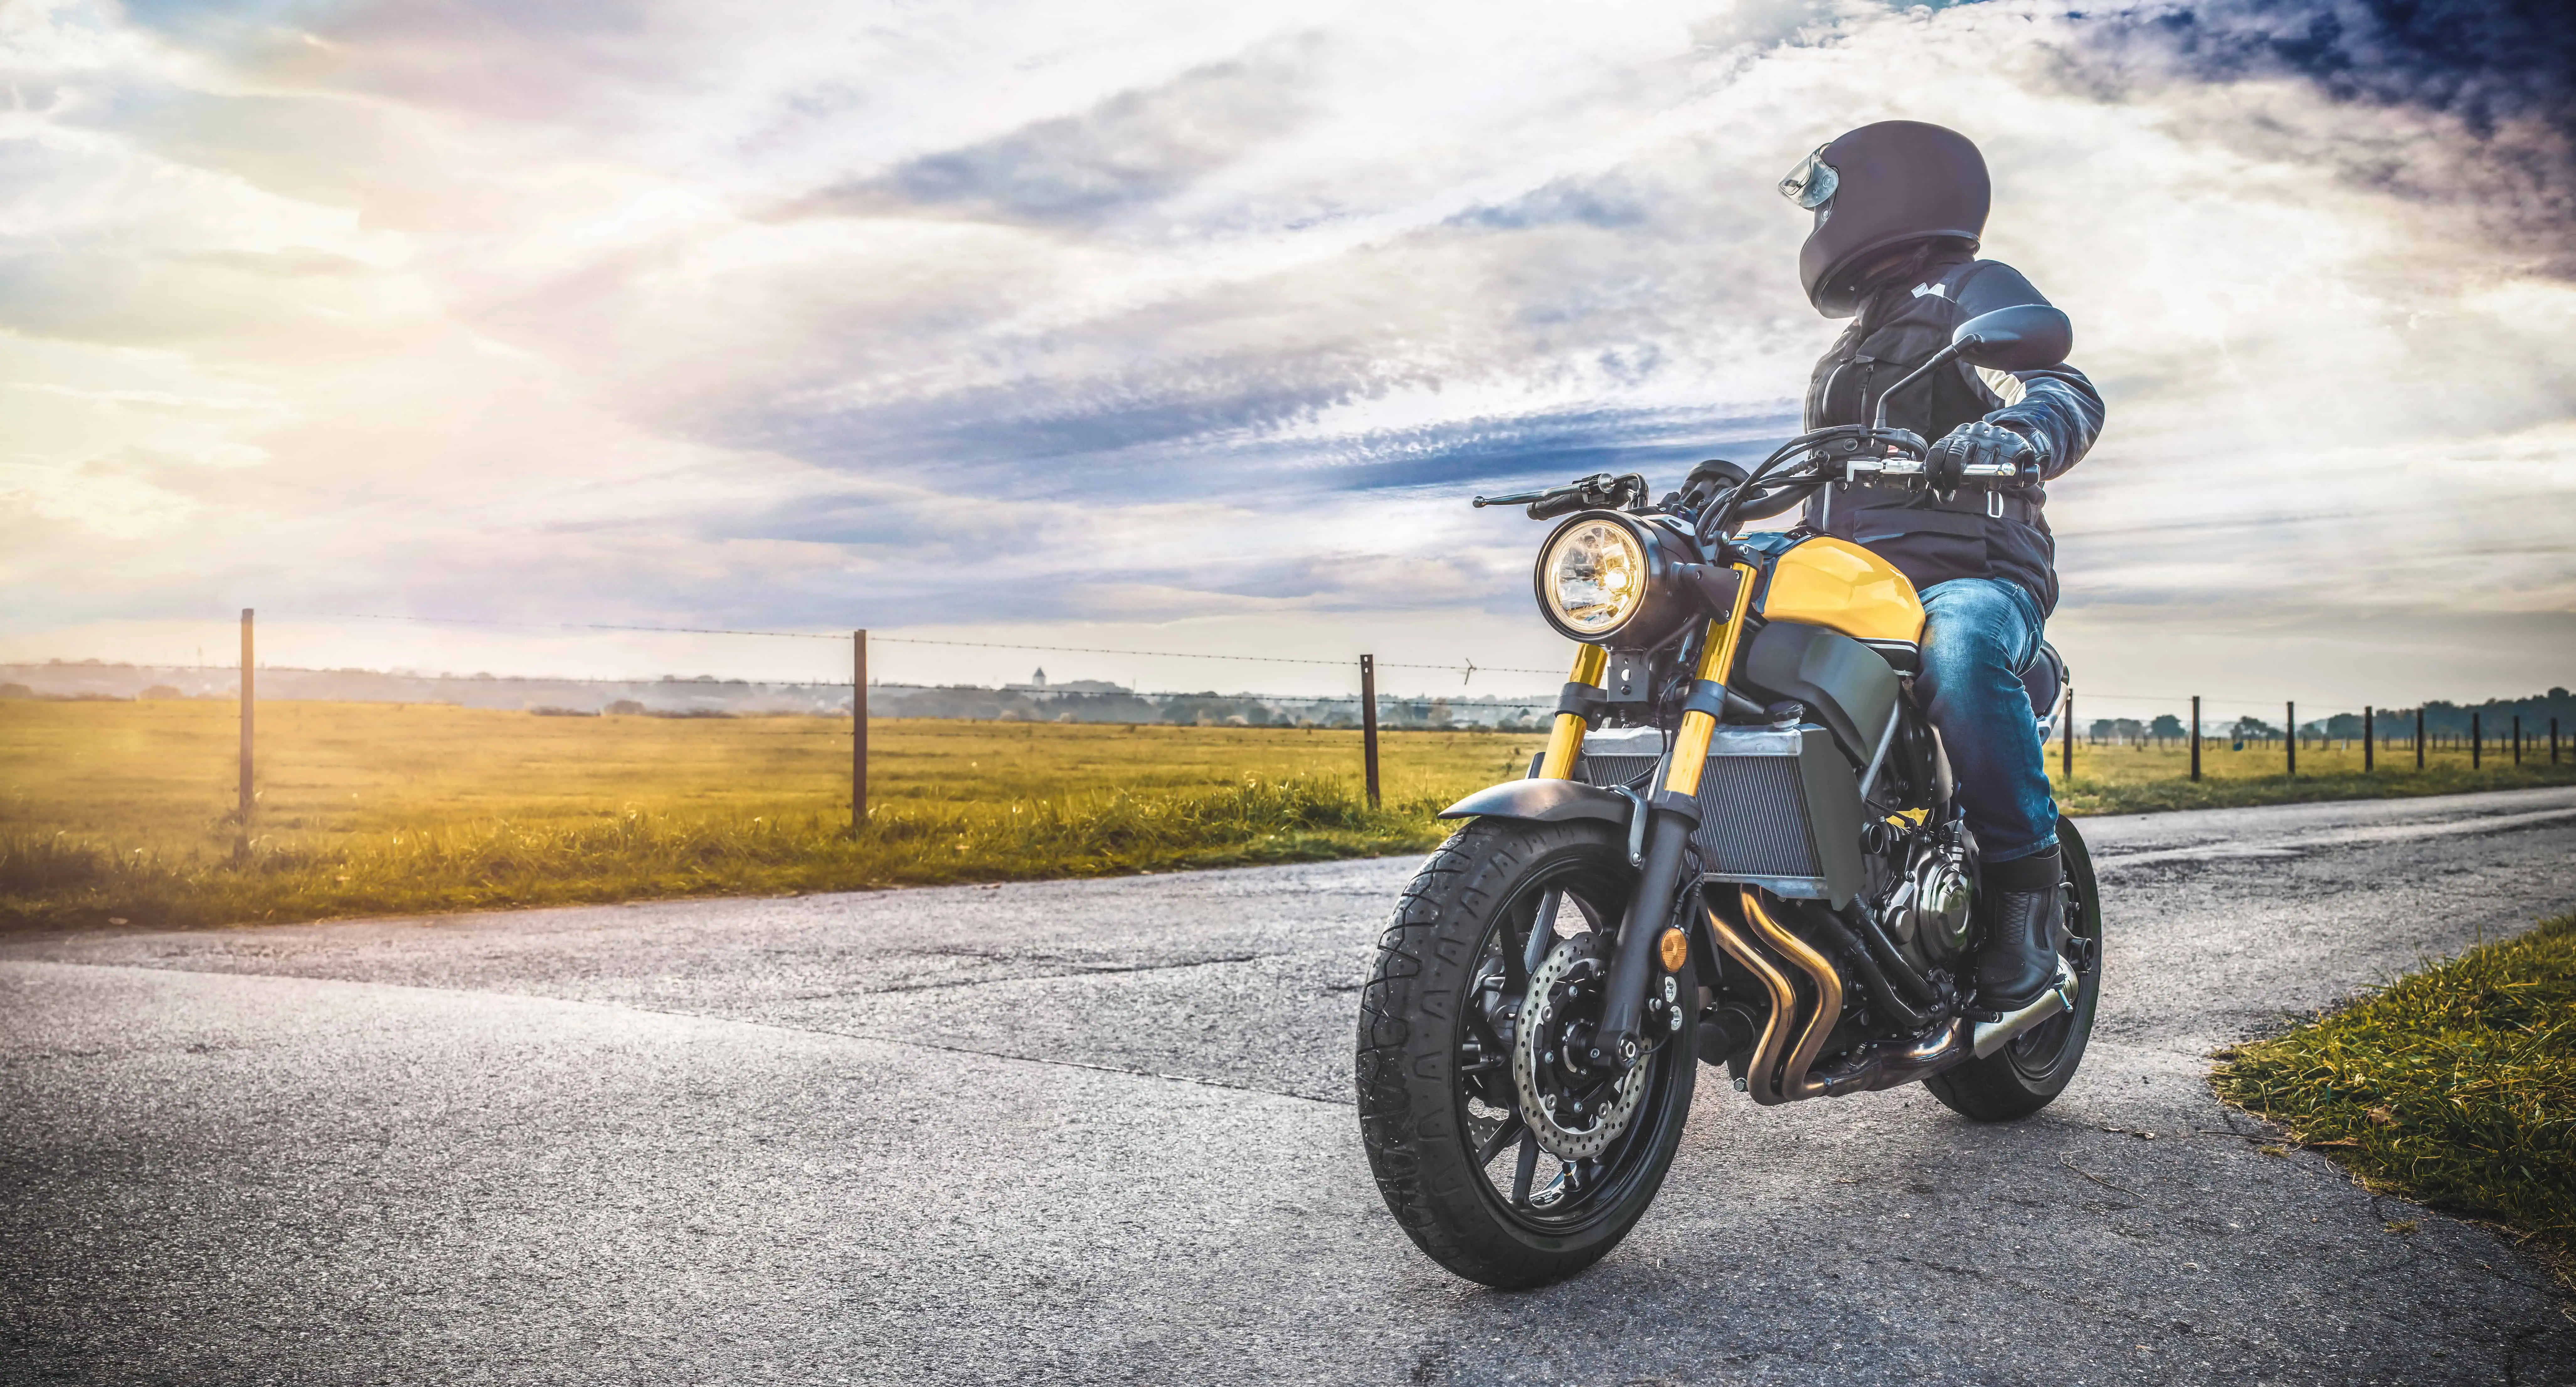 Motorcycle Insurance: What Every Rider Needs to Know